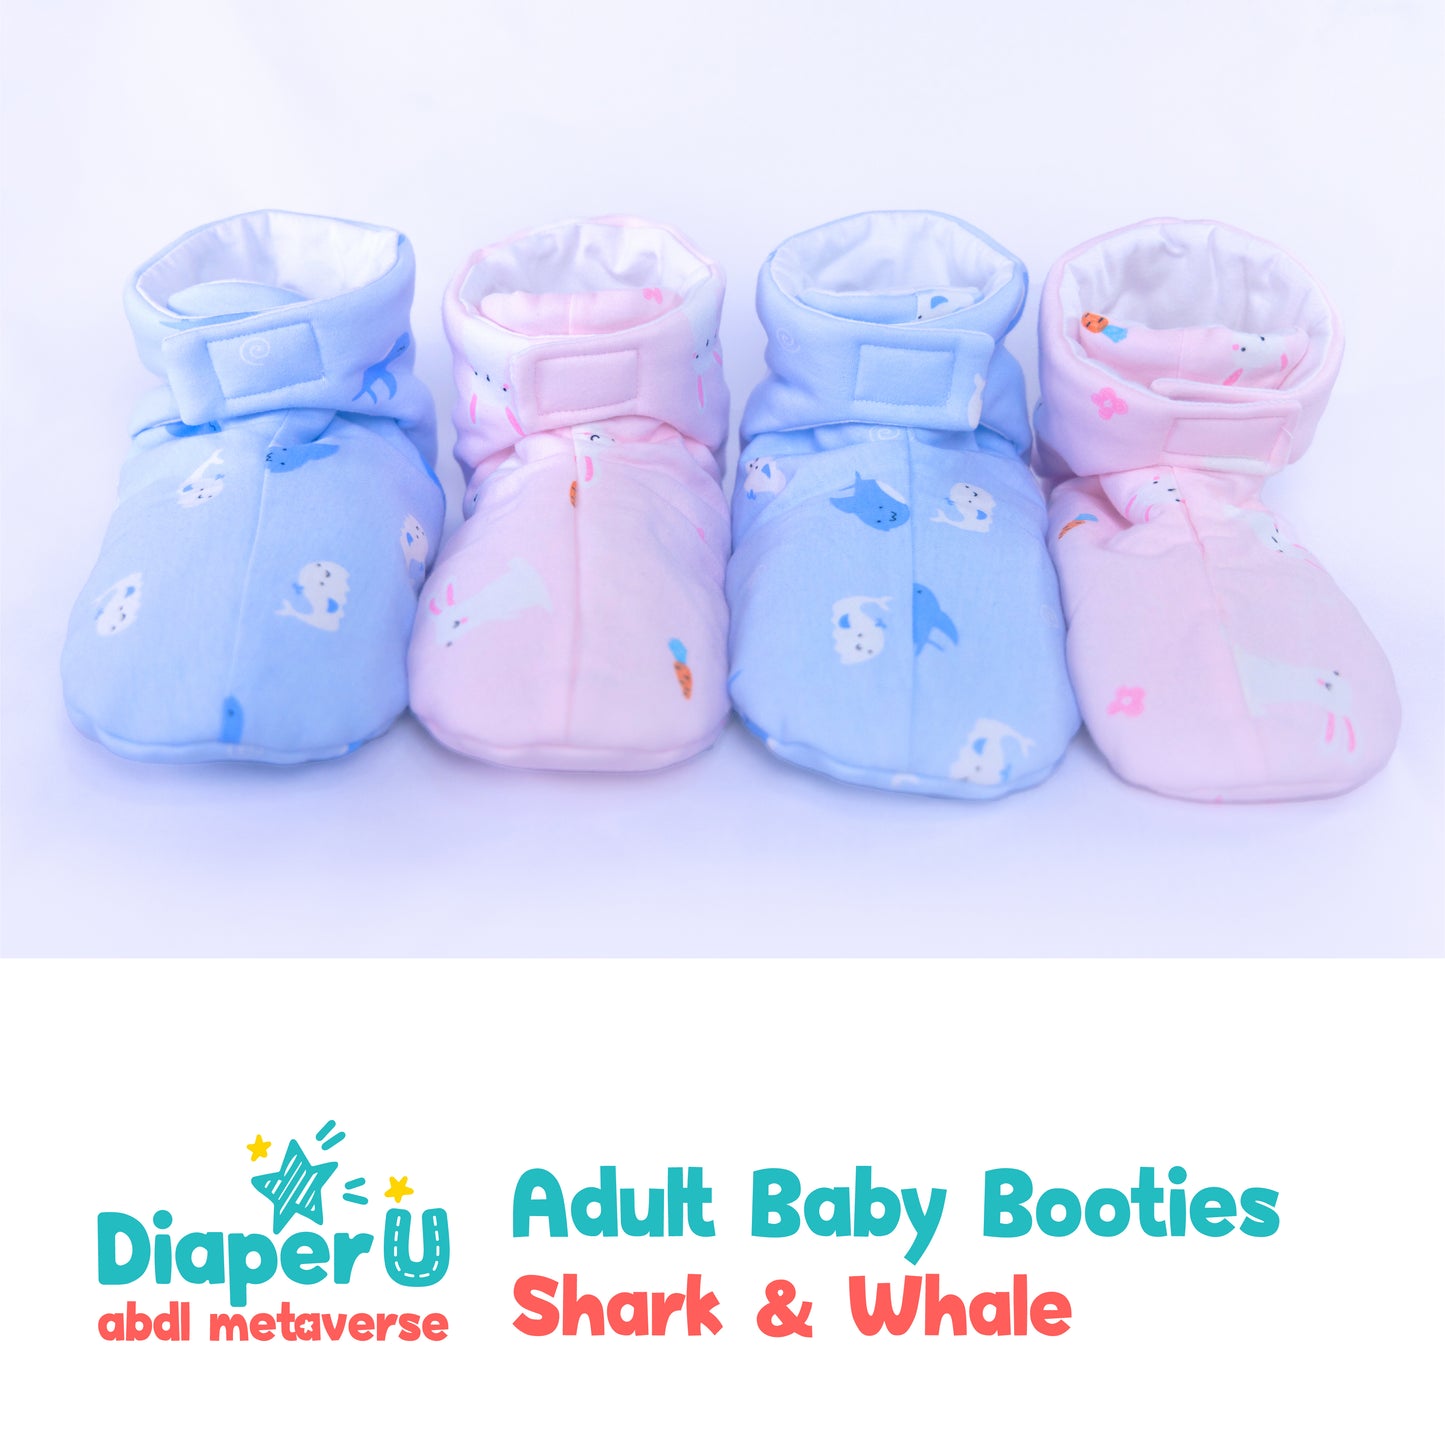 ABDL Baby Booties - Shark & Whale